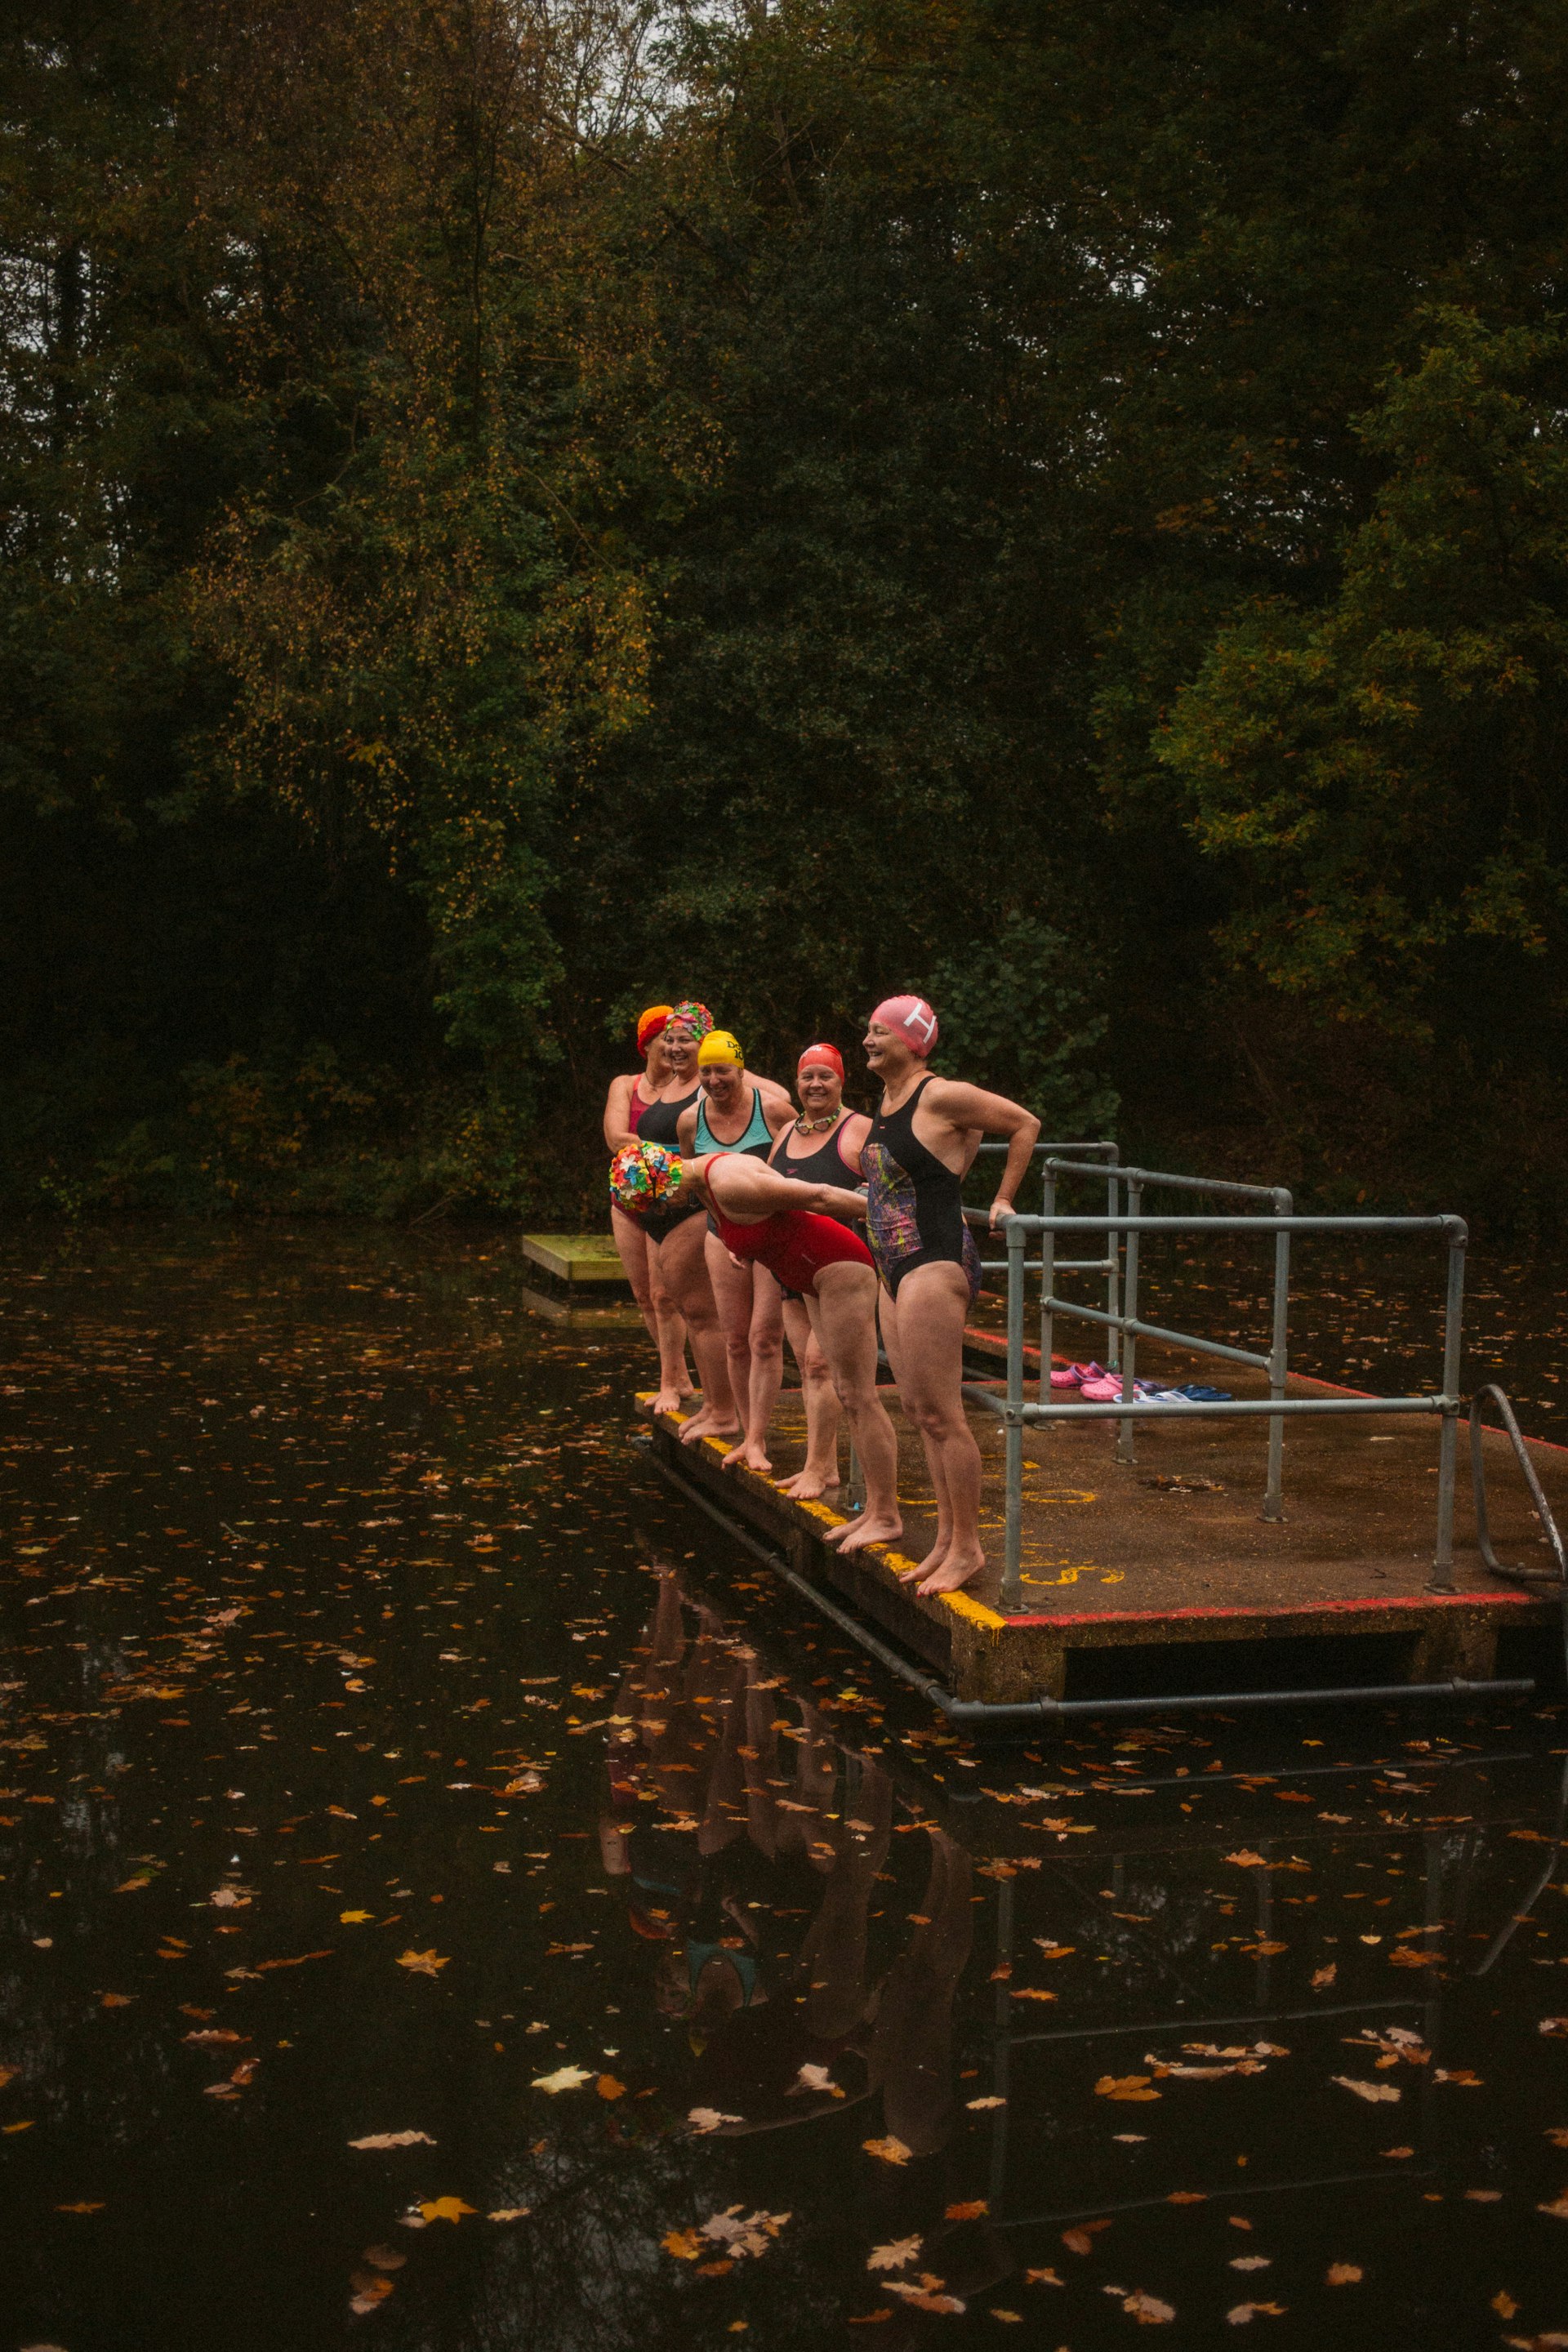 Women in swim gear stand on a platform ready to jump into a swimming pond